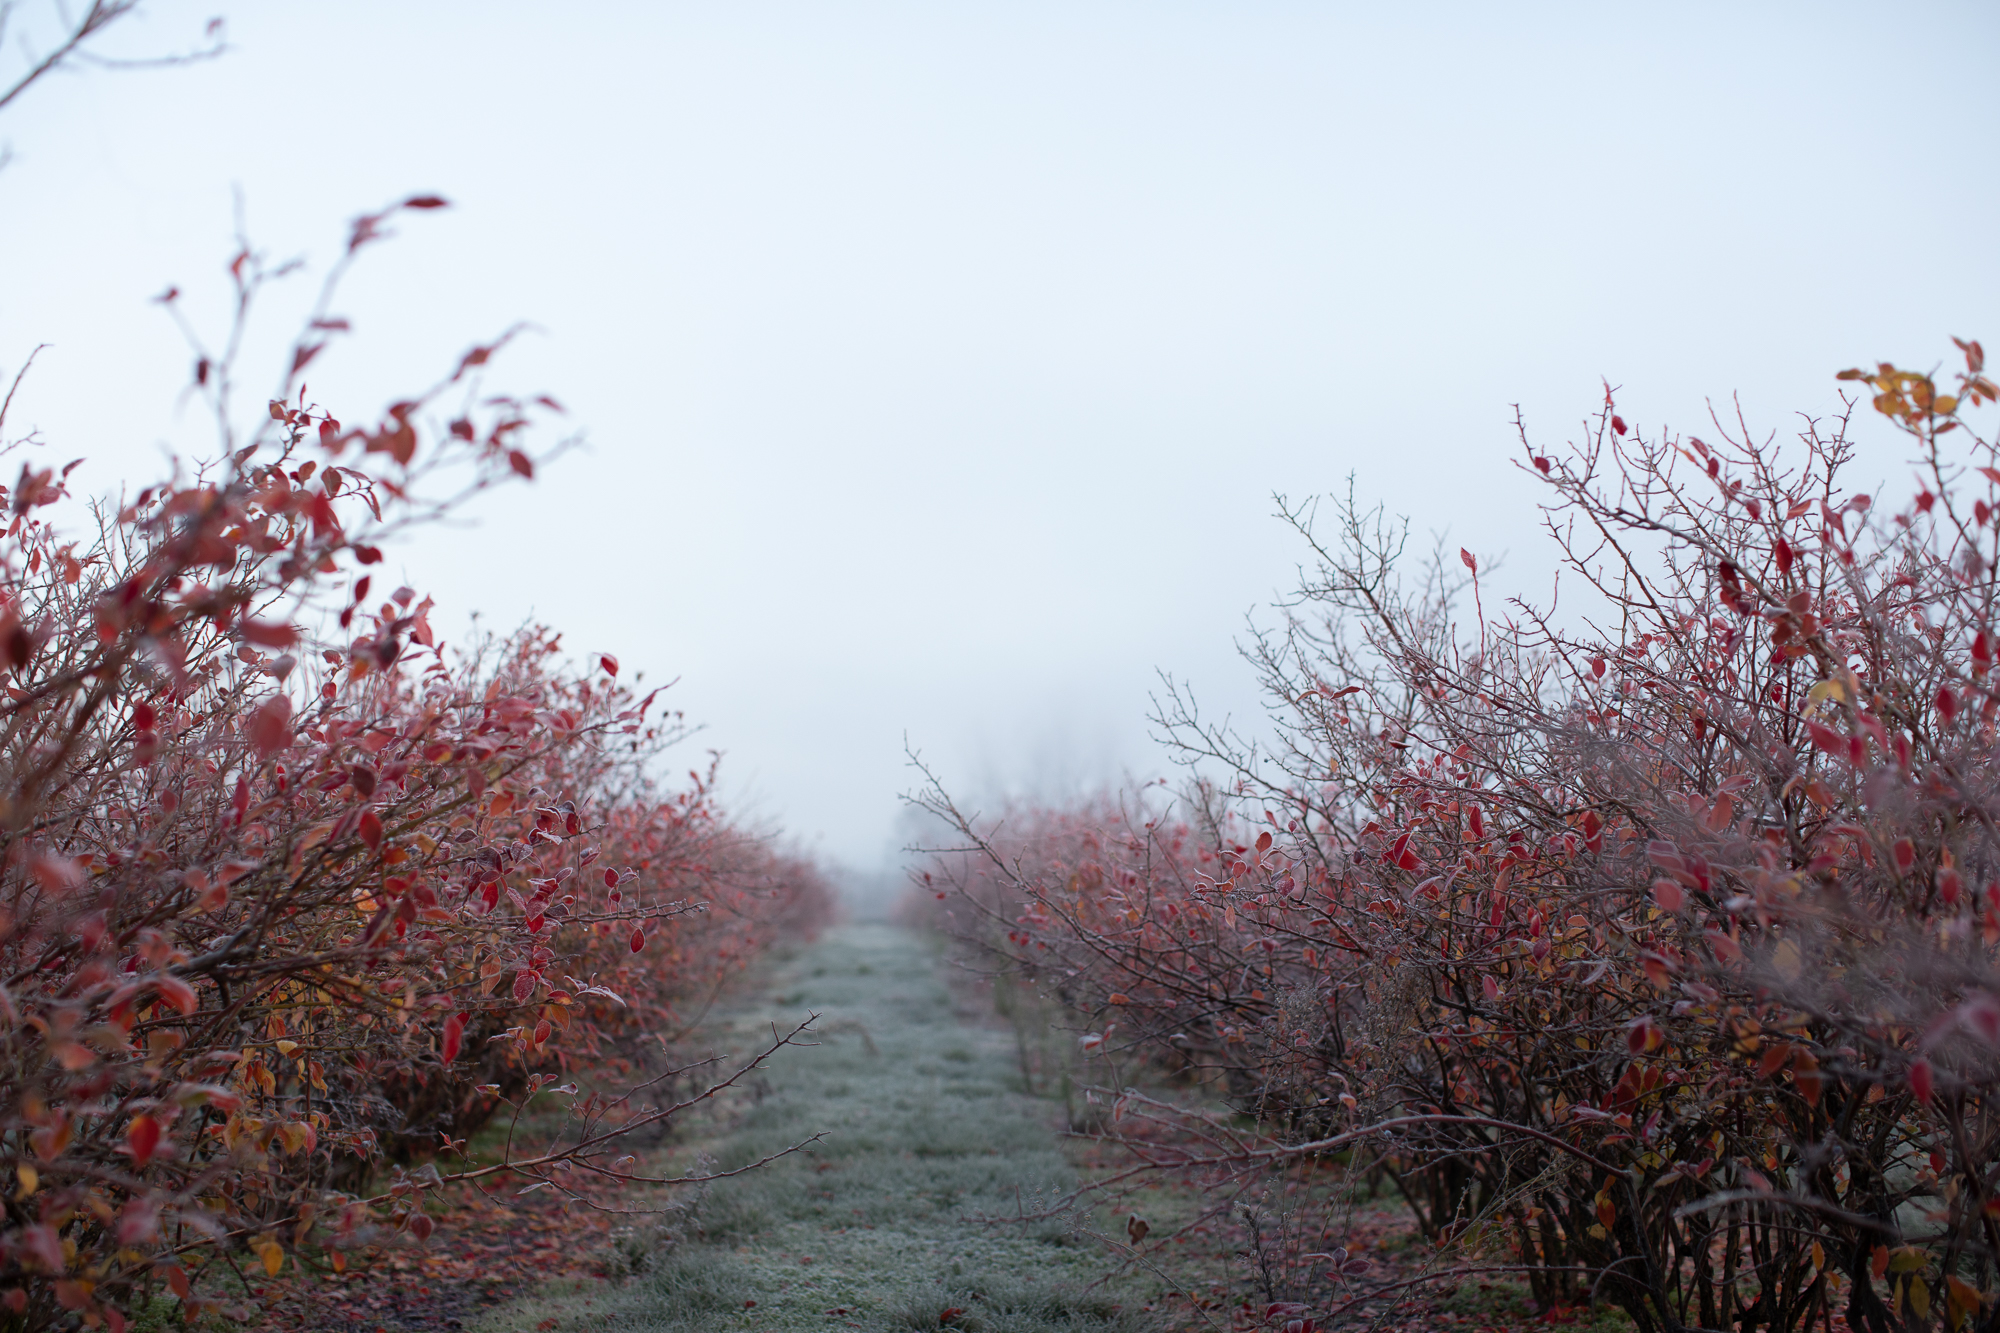 Red shrubs in a foggy field